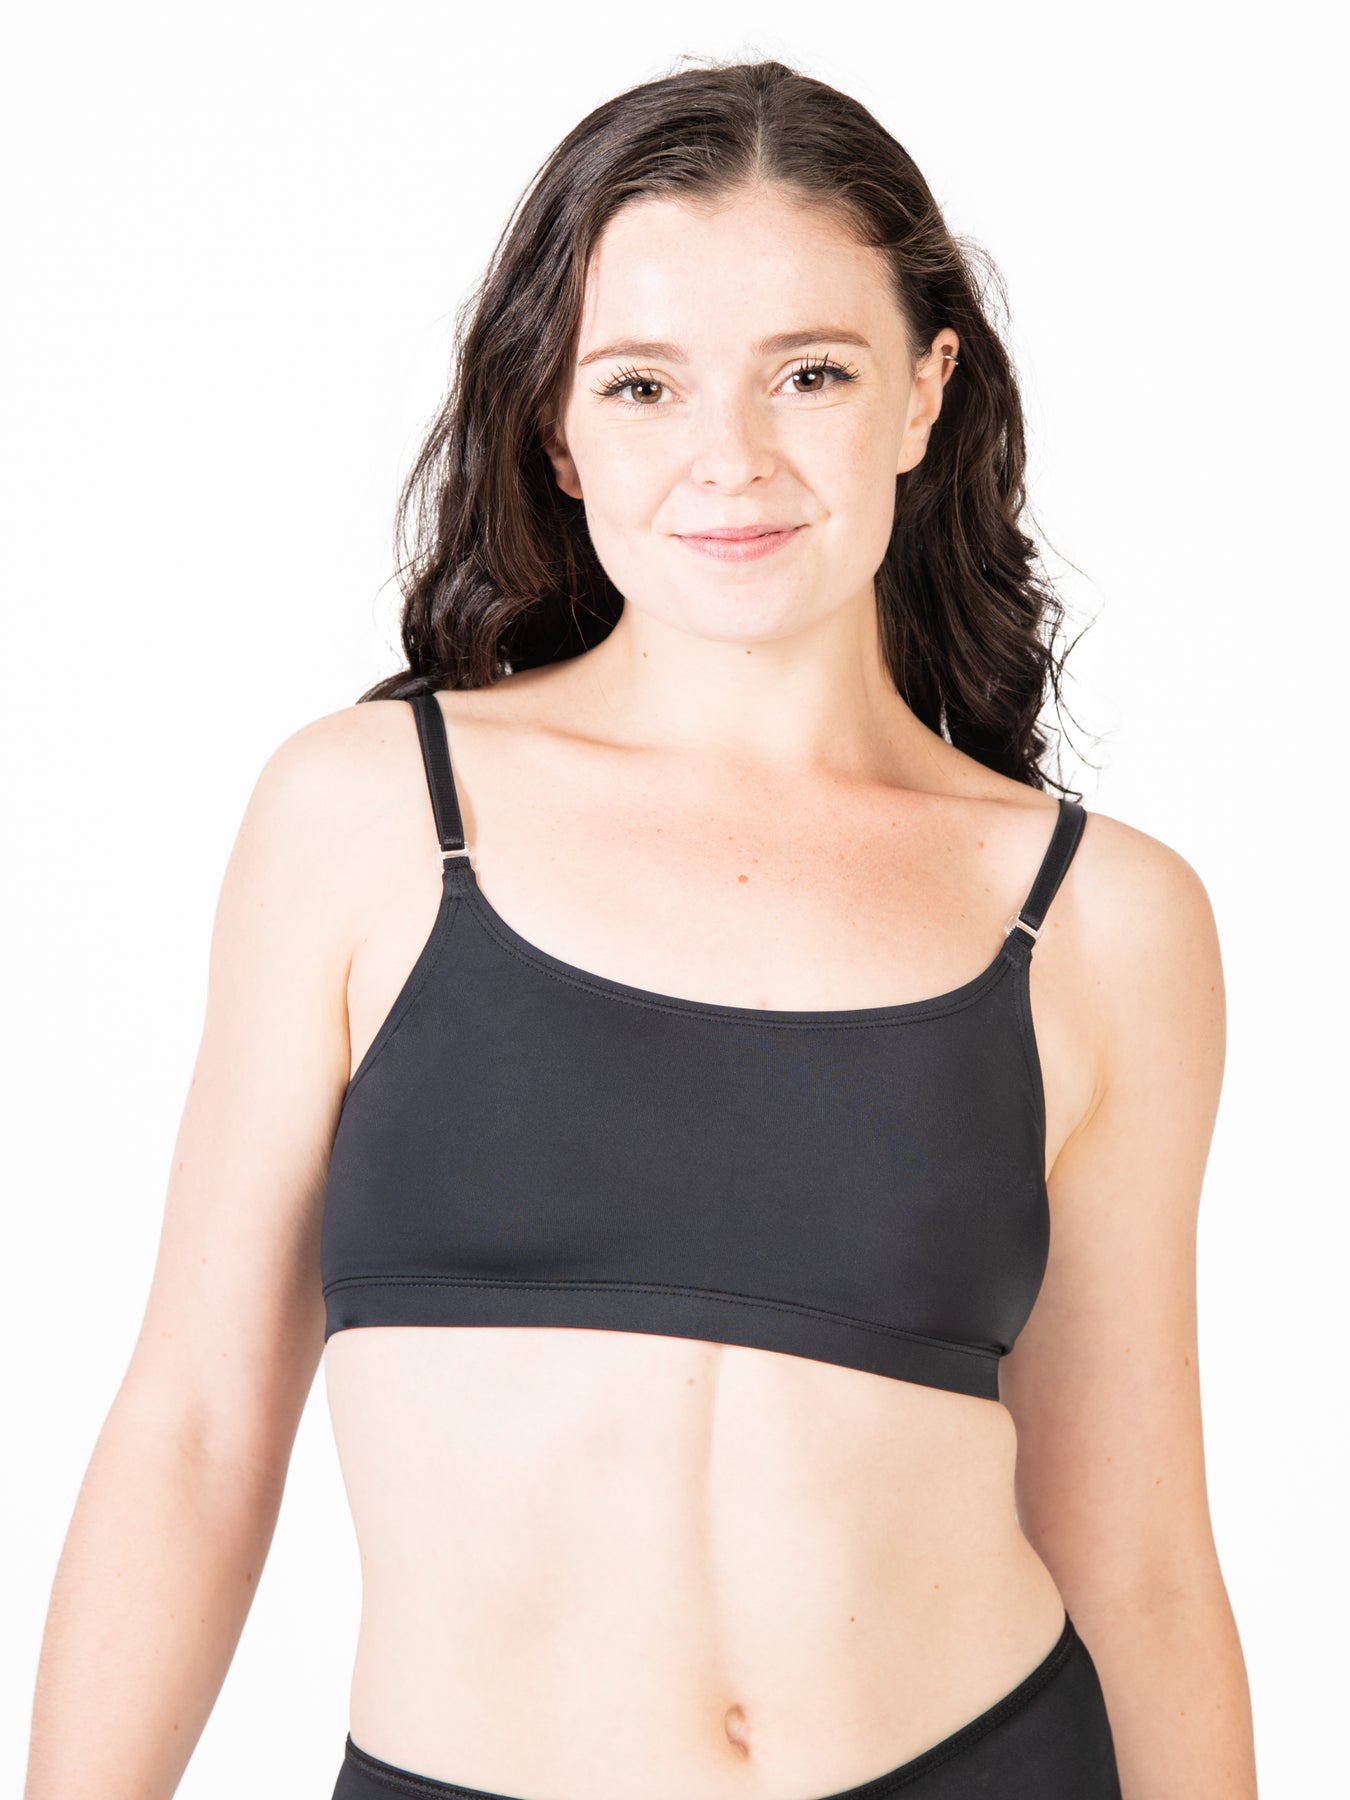 Undergarments - WOMENS – Body Wrappers